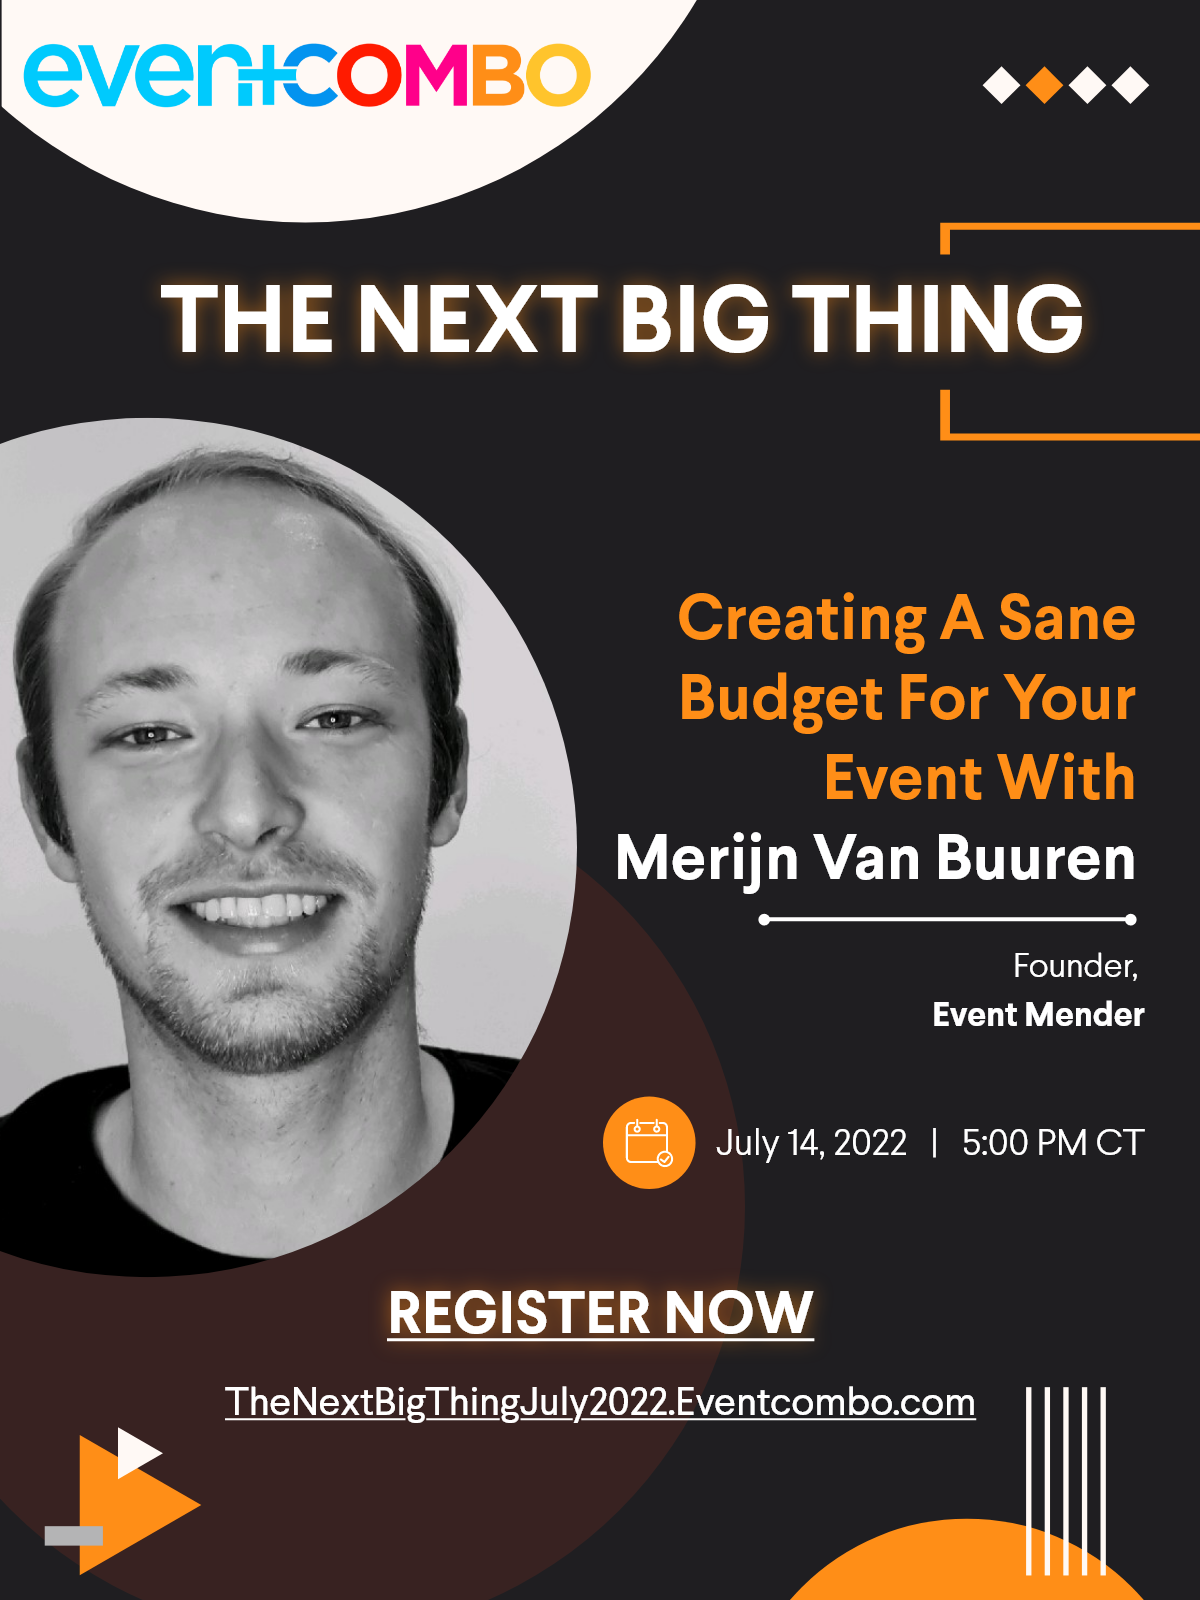 Creating A Sane Budget For Your Event with Merijn Van Buuren | The Next Big Thing | A Webinar Series by Eventcombo